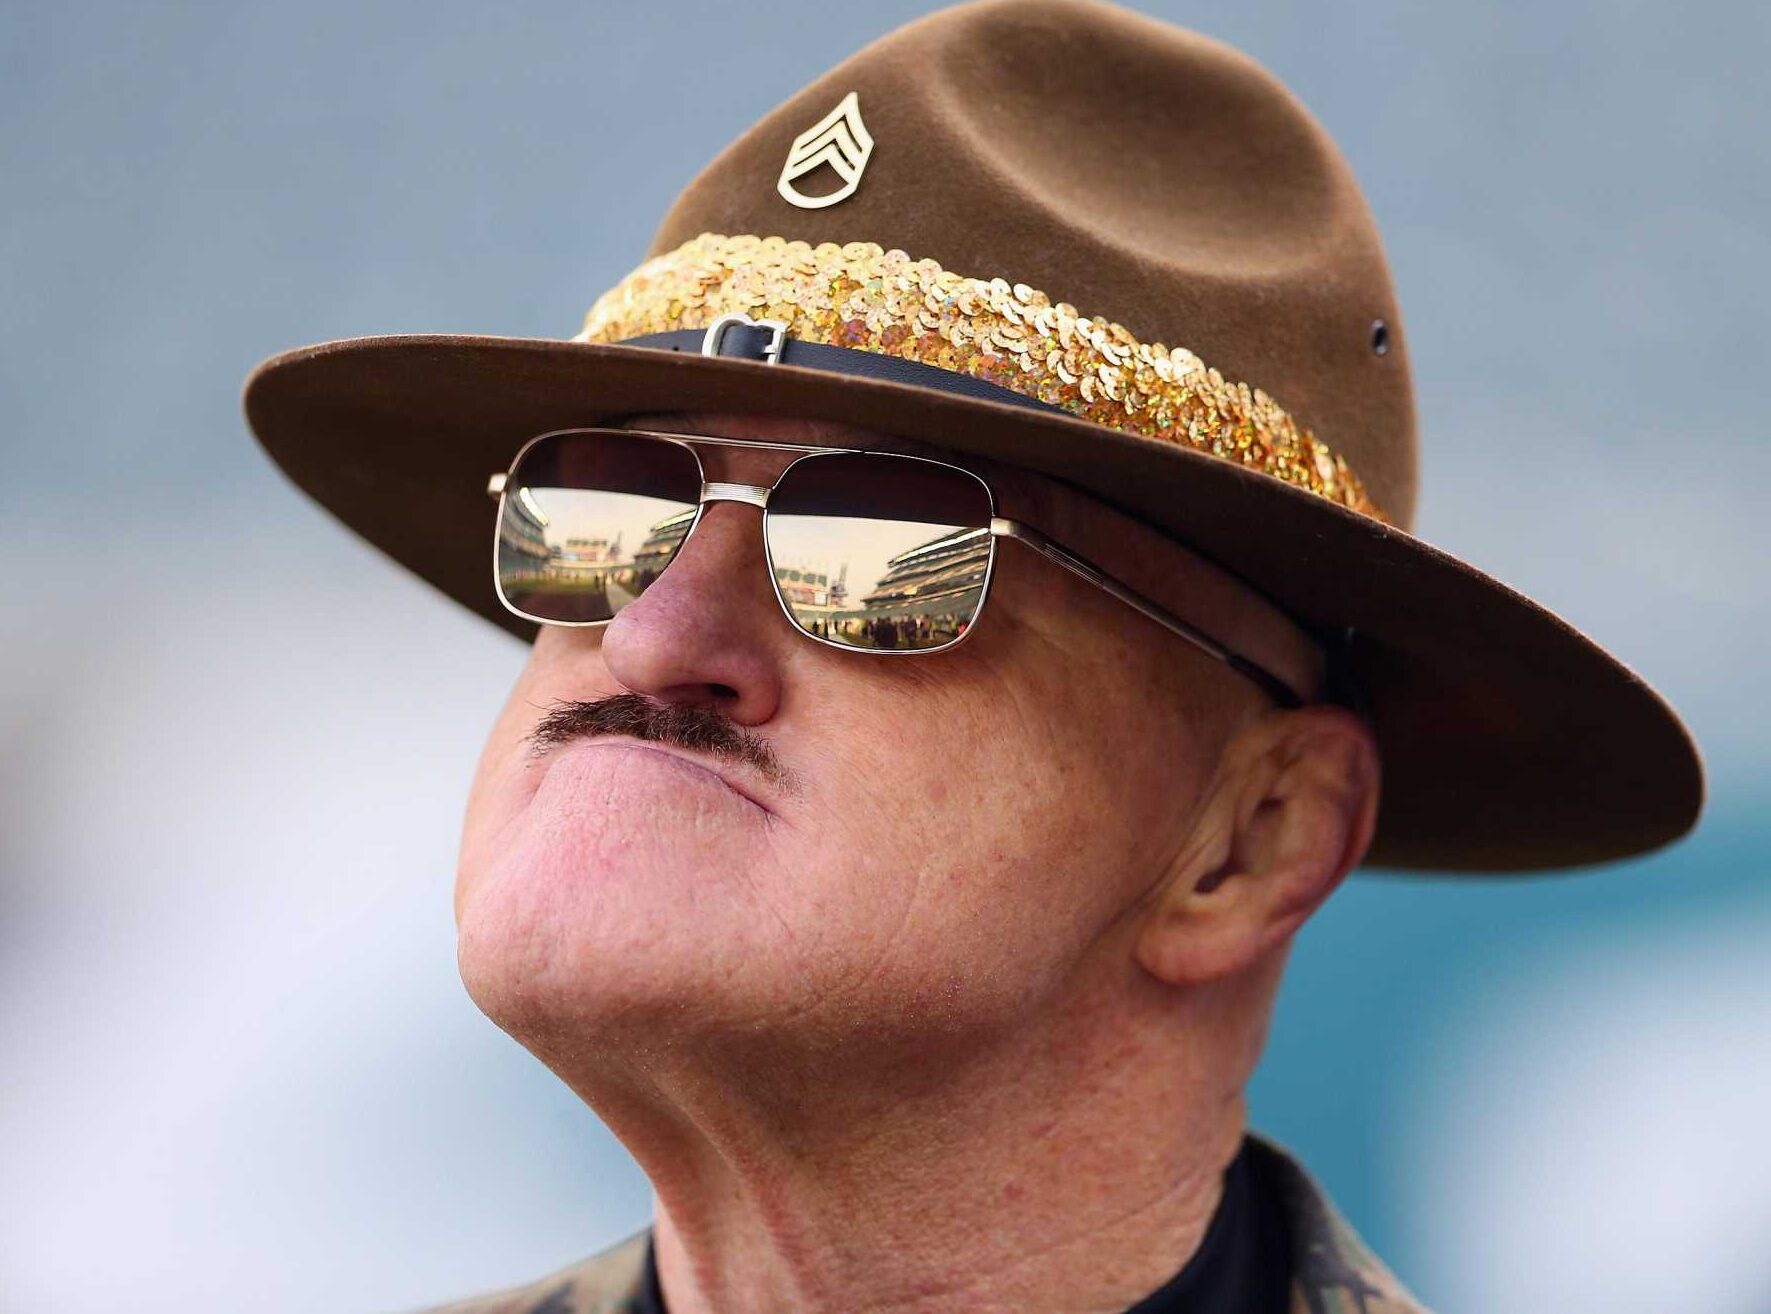 The proposal from WWE for me to guide Lacey Evans was a direct insult, says Sgt. Slaughter.